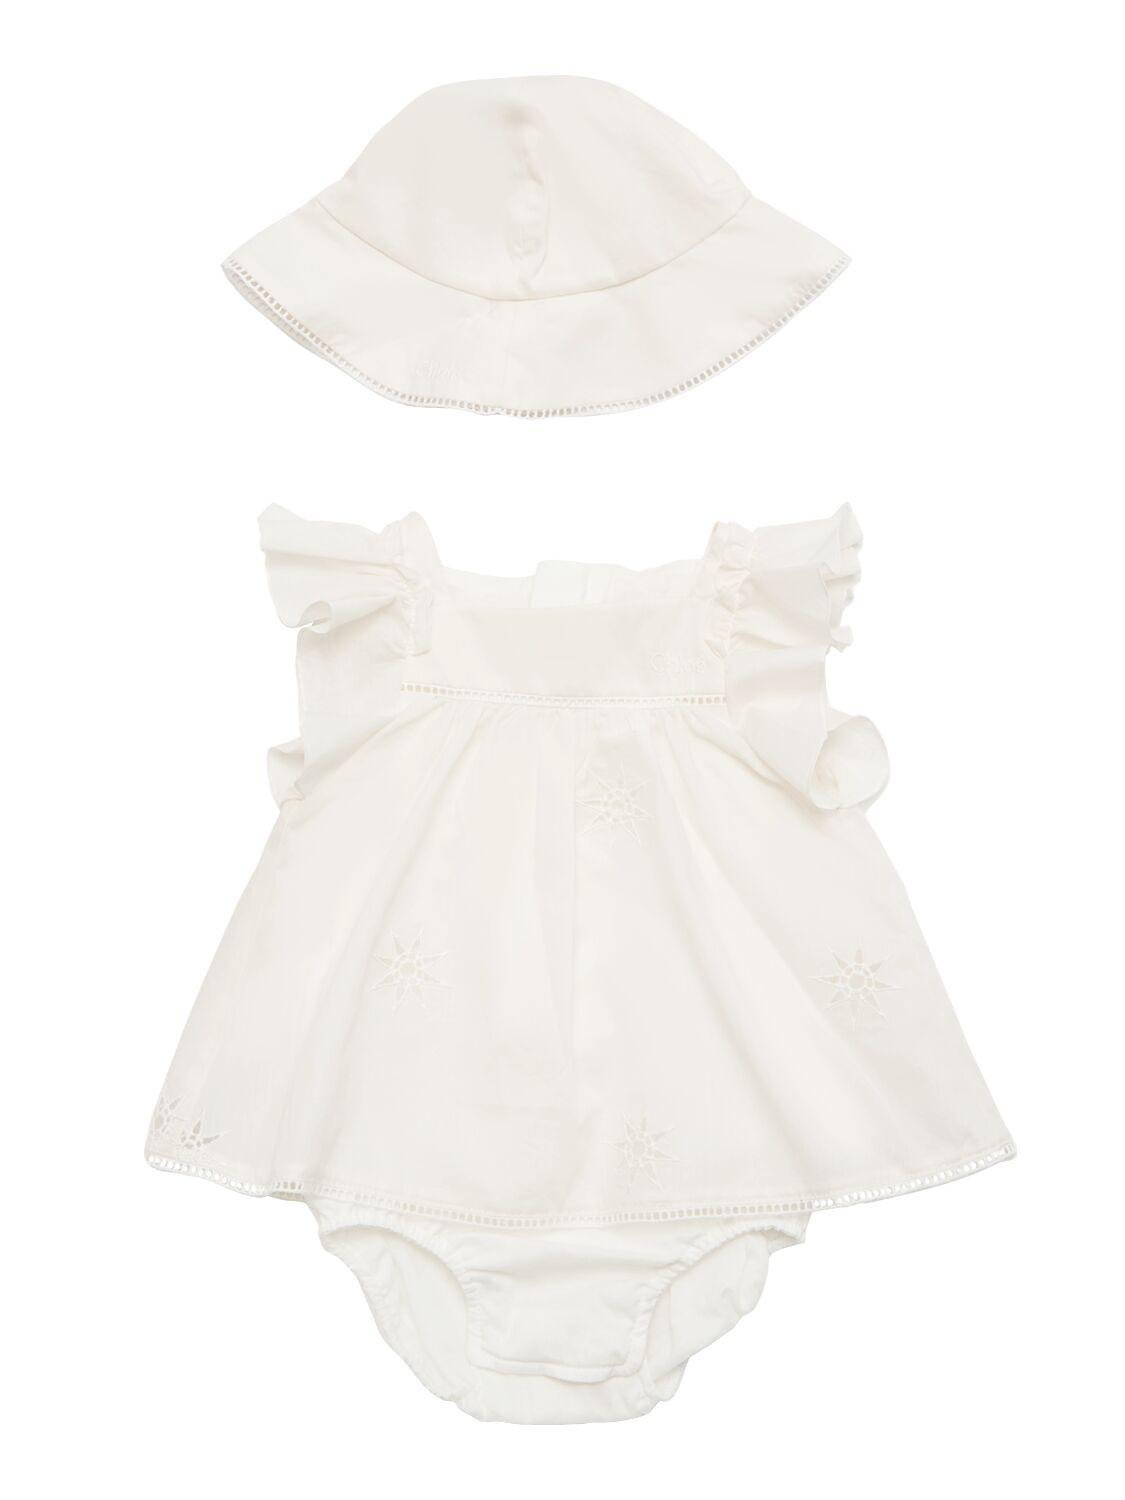 Organic Percale Cotton Dress & Hat by CHLOE